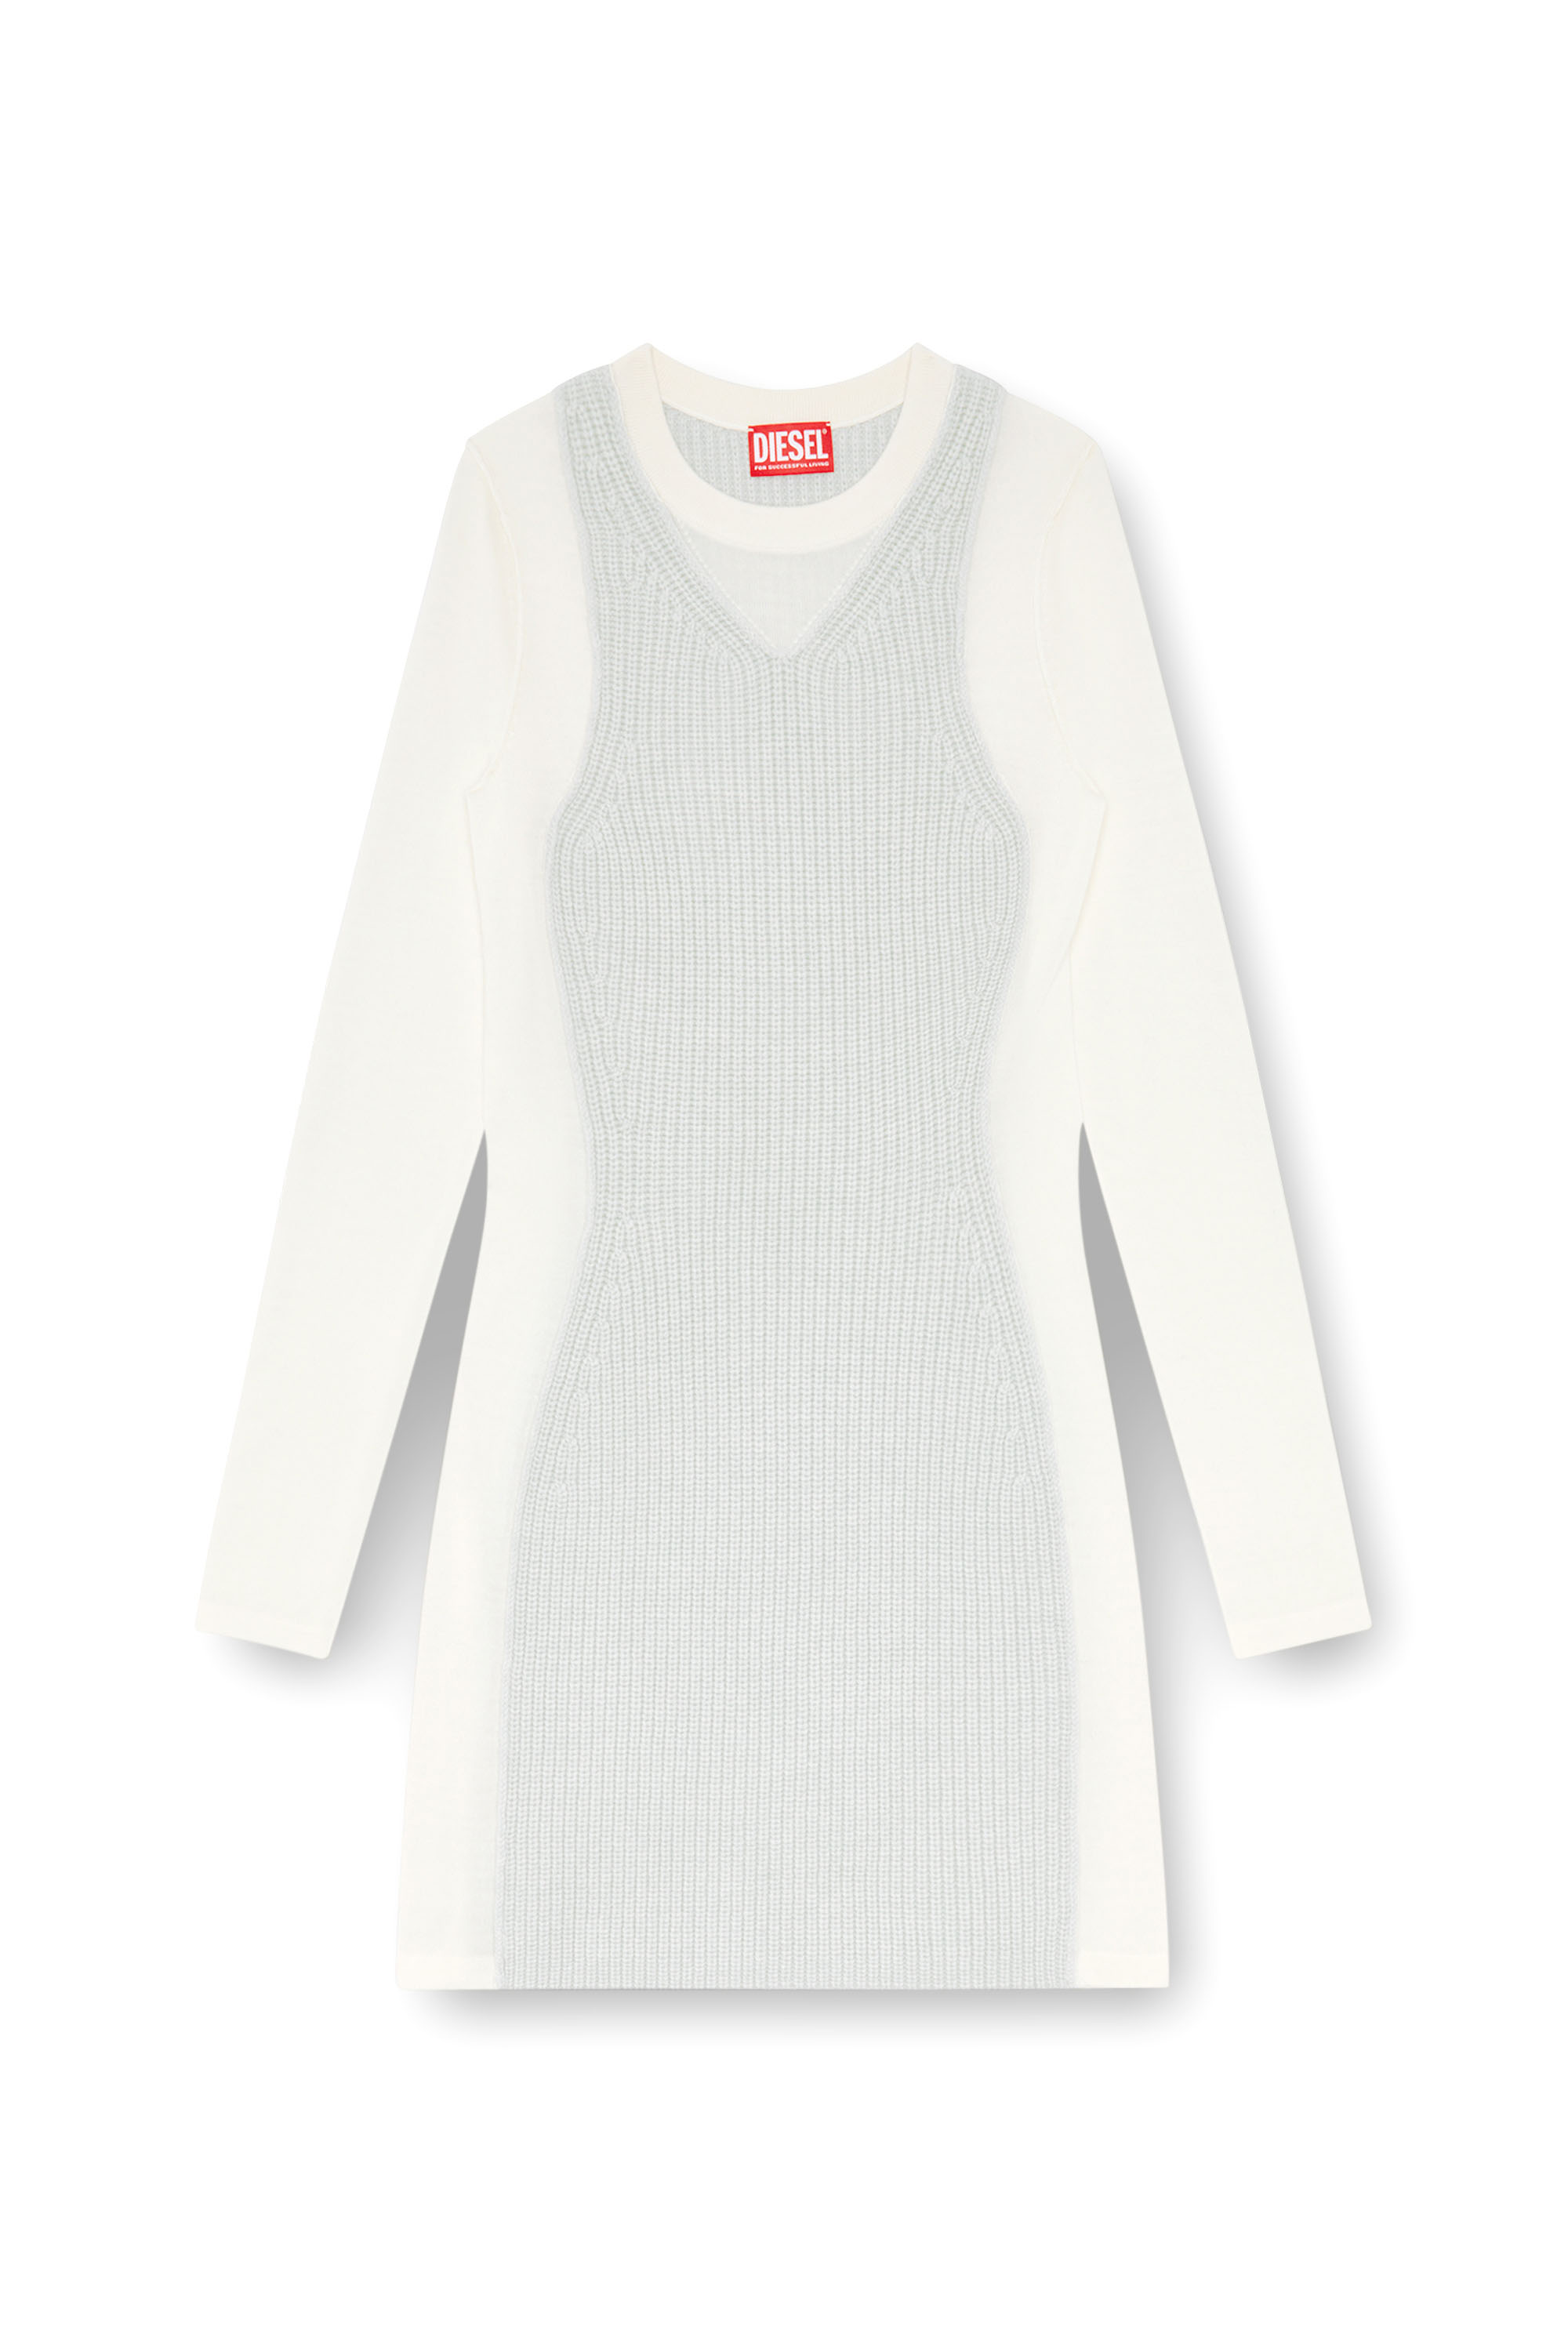 Diesel - M-ARENA, Female Short knit dress with layered effect in ホワイト - Image 4